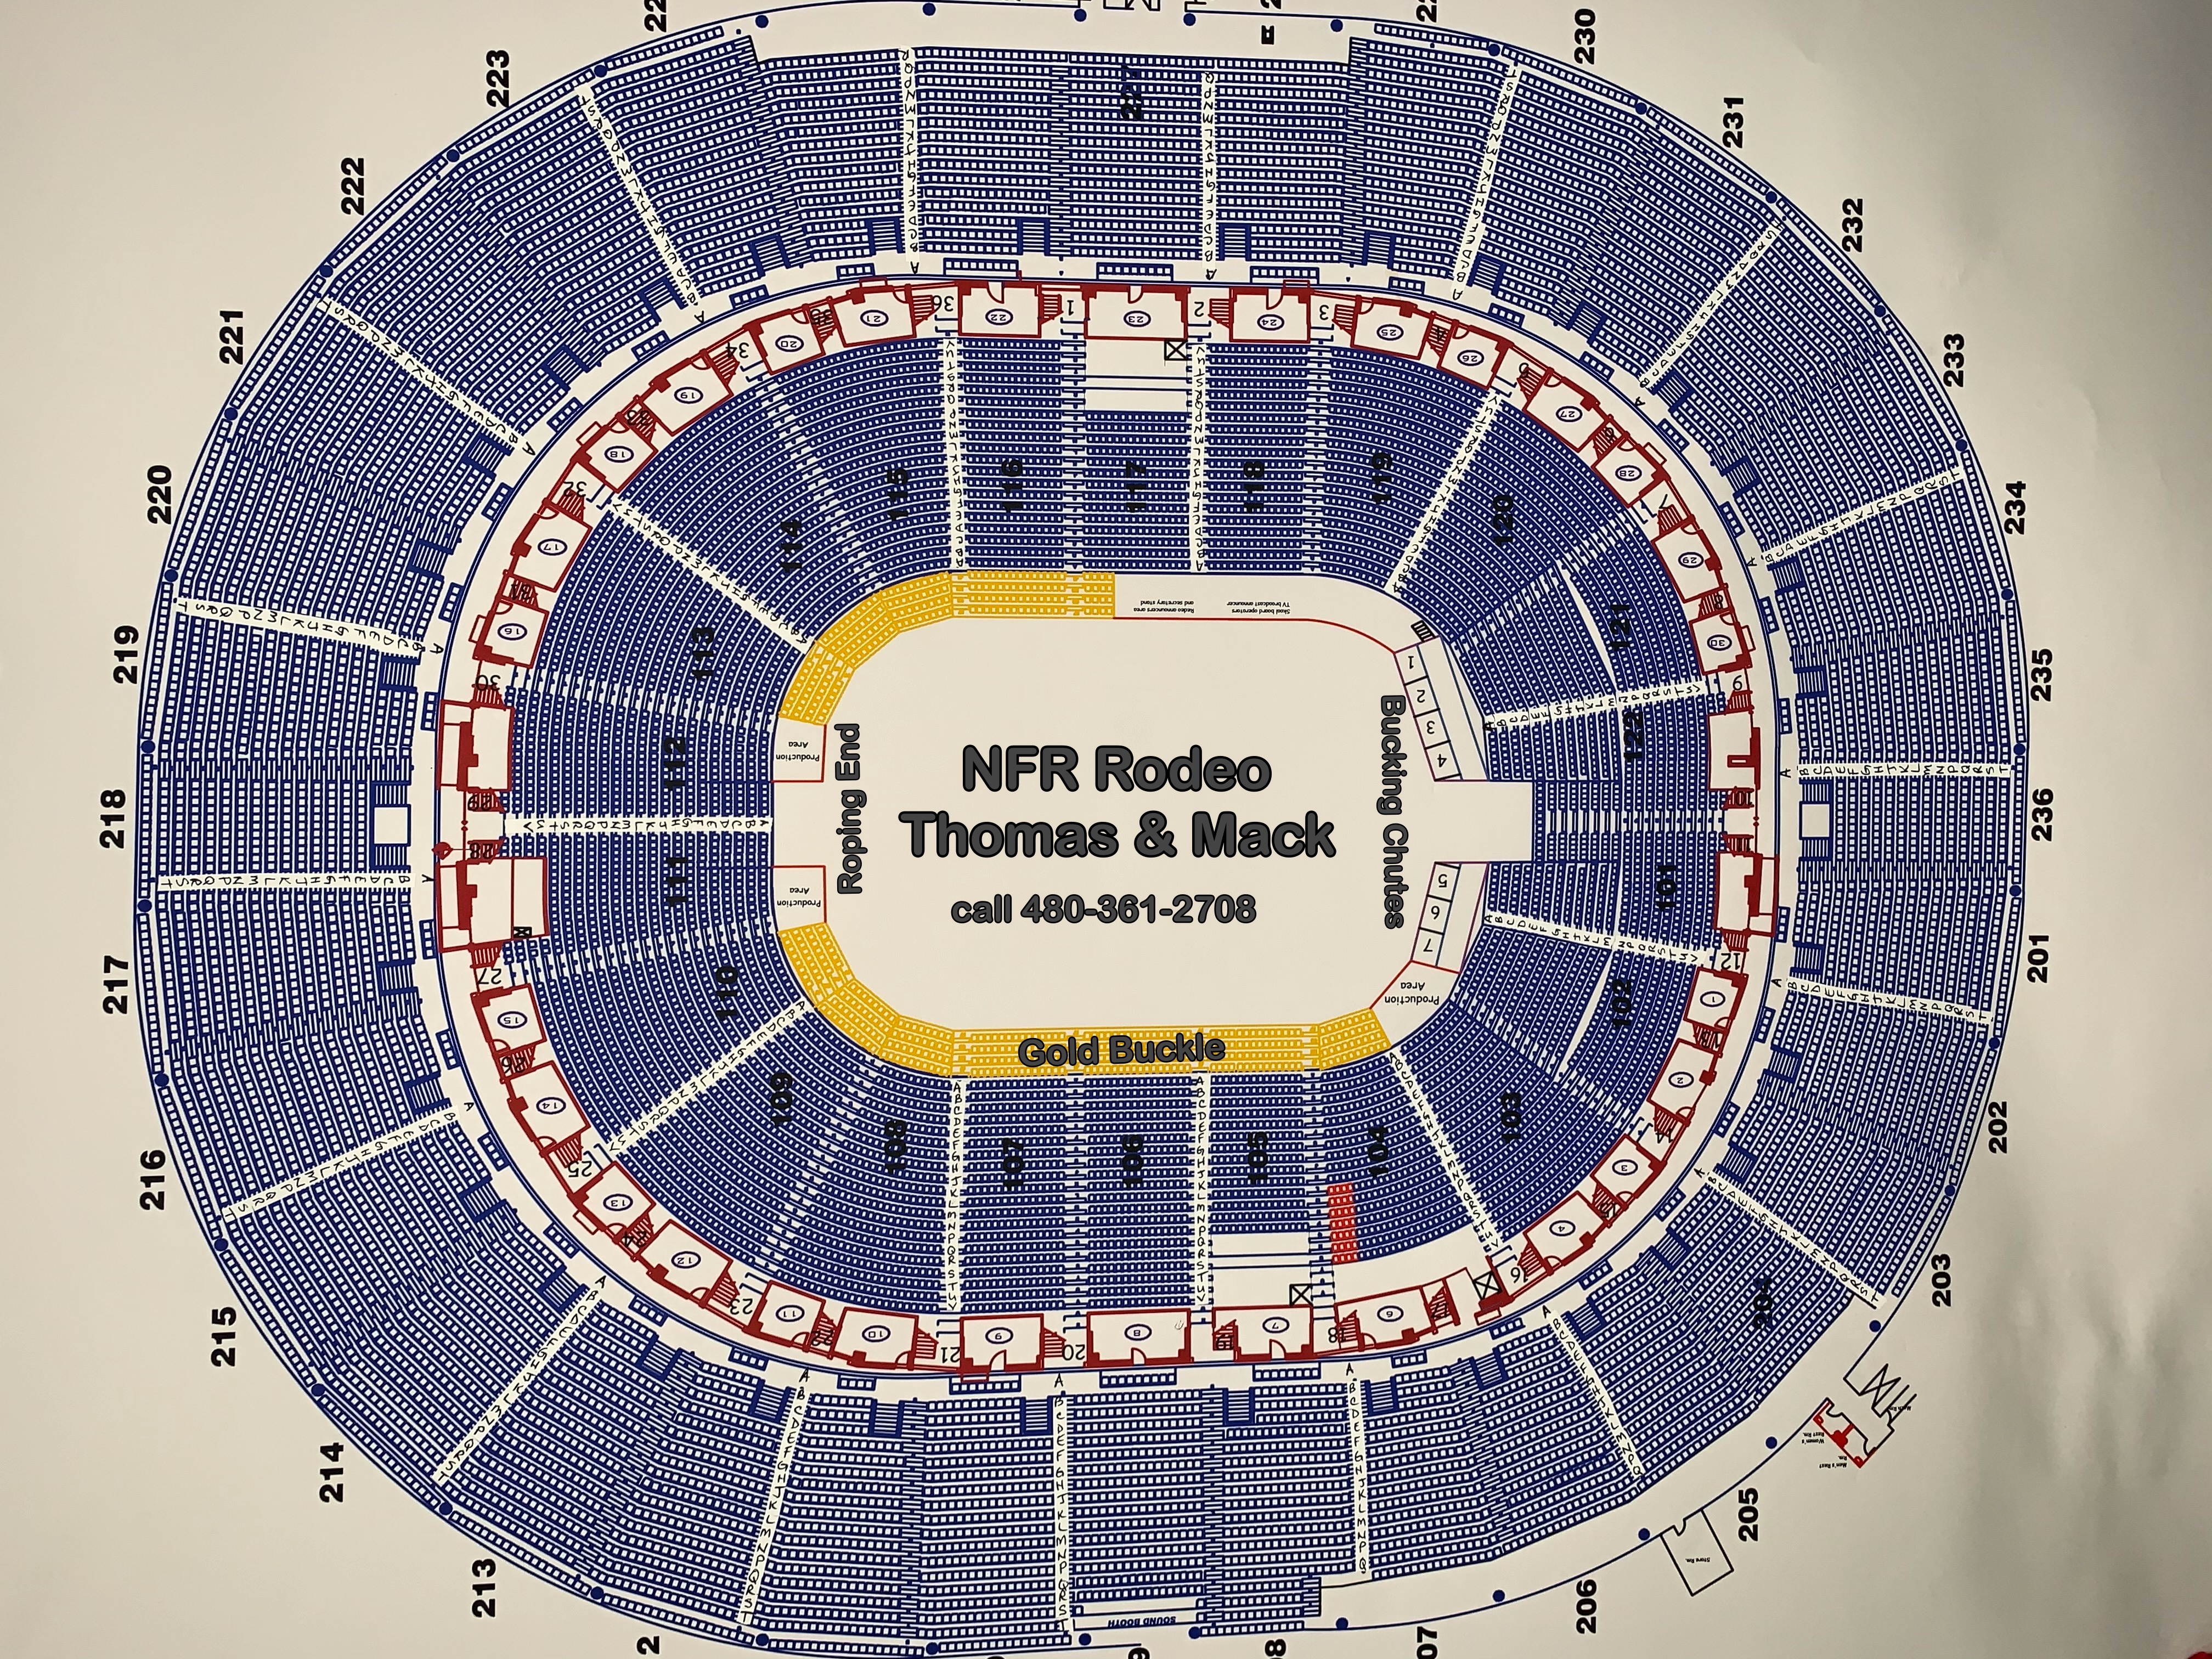 NFR Rodeo Tickets, Thomas and Mack Seating Guide